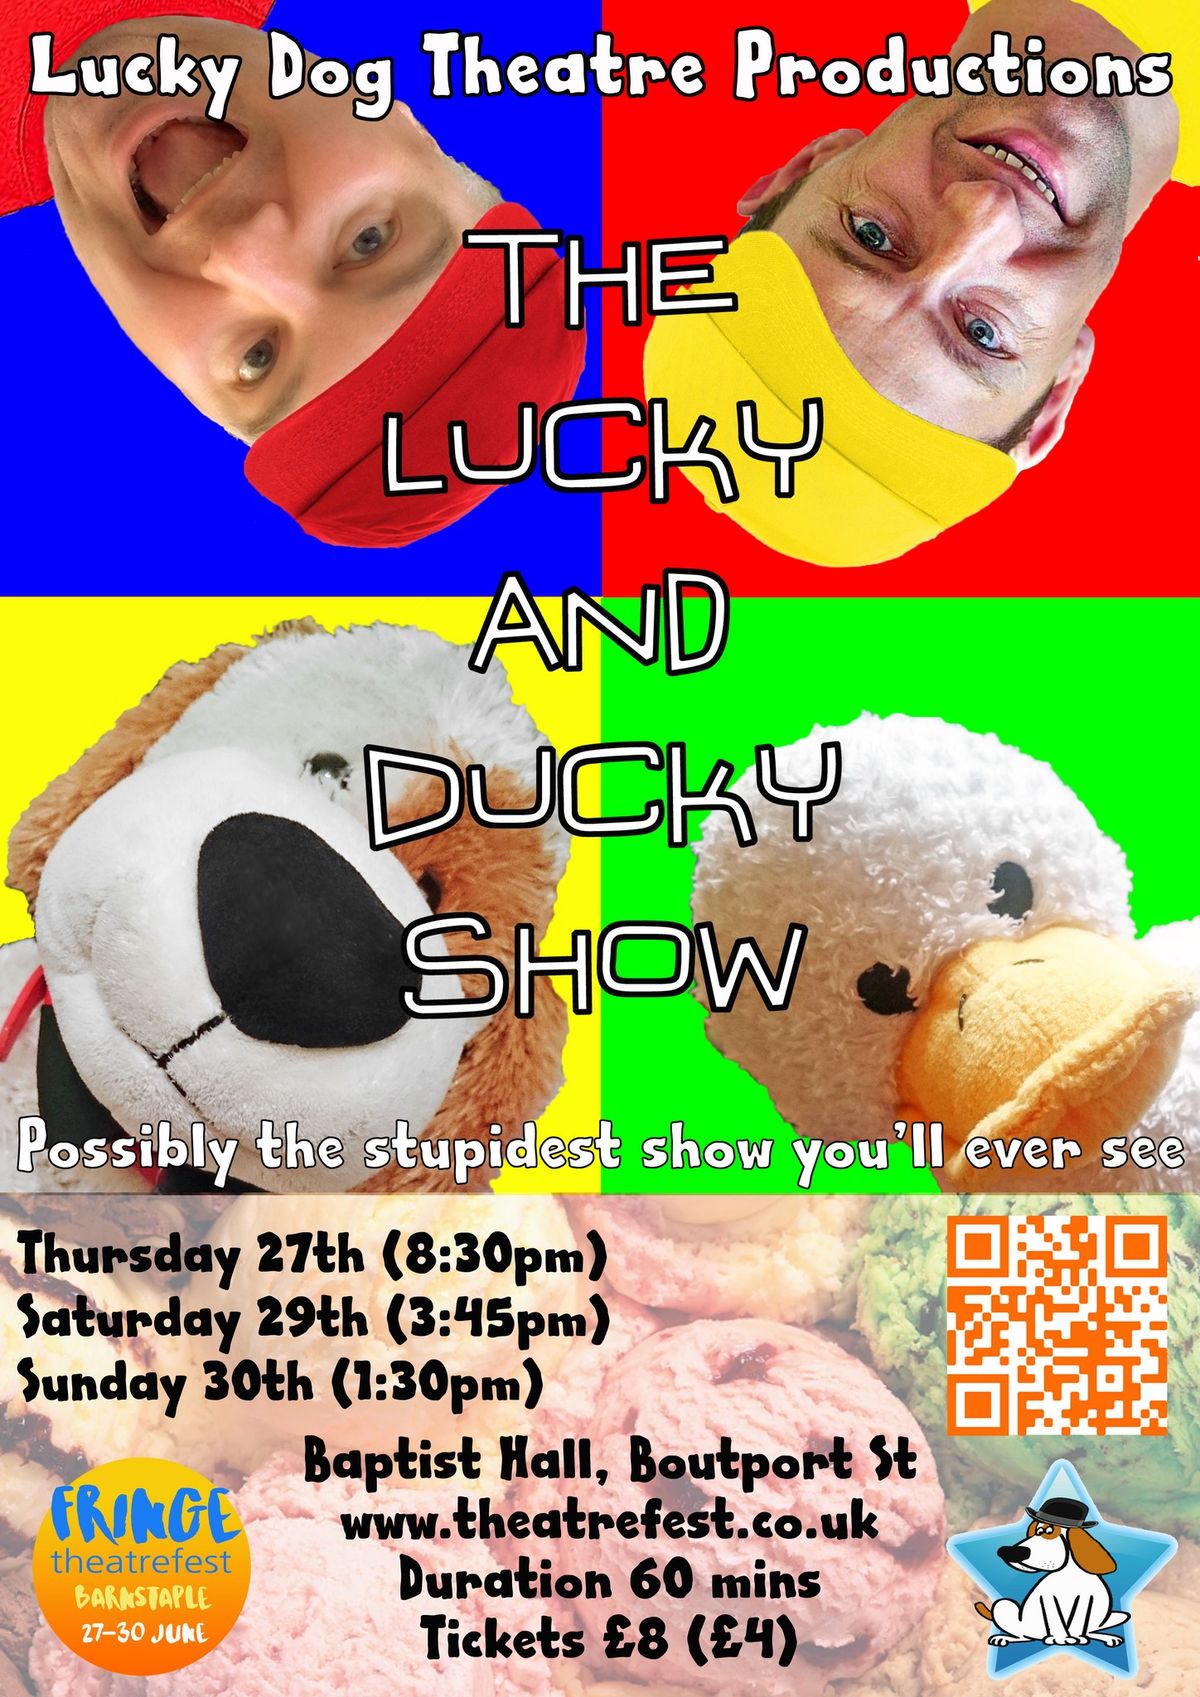 THE LUCKY AND DUCKY SHOW (Lucky Dog Theatre Productions)